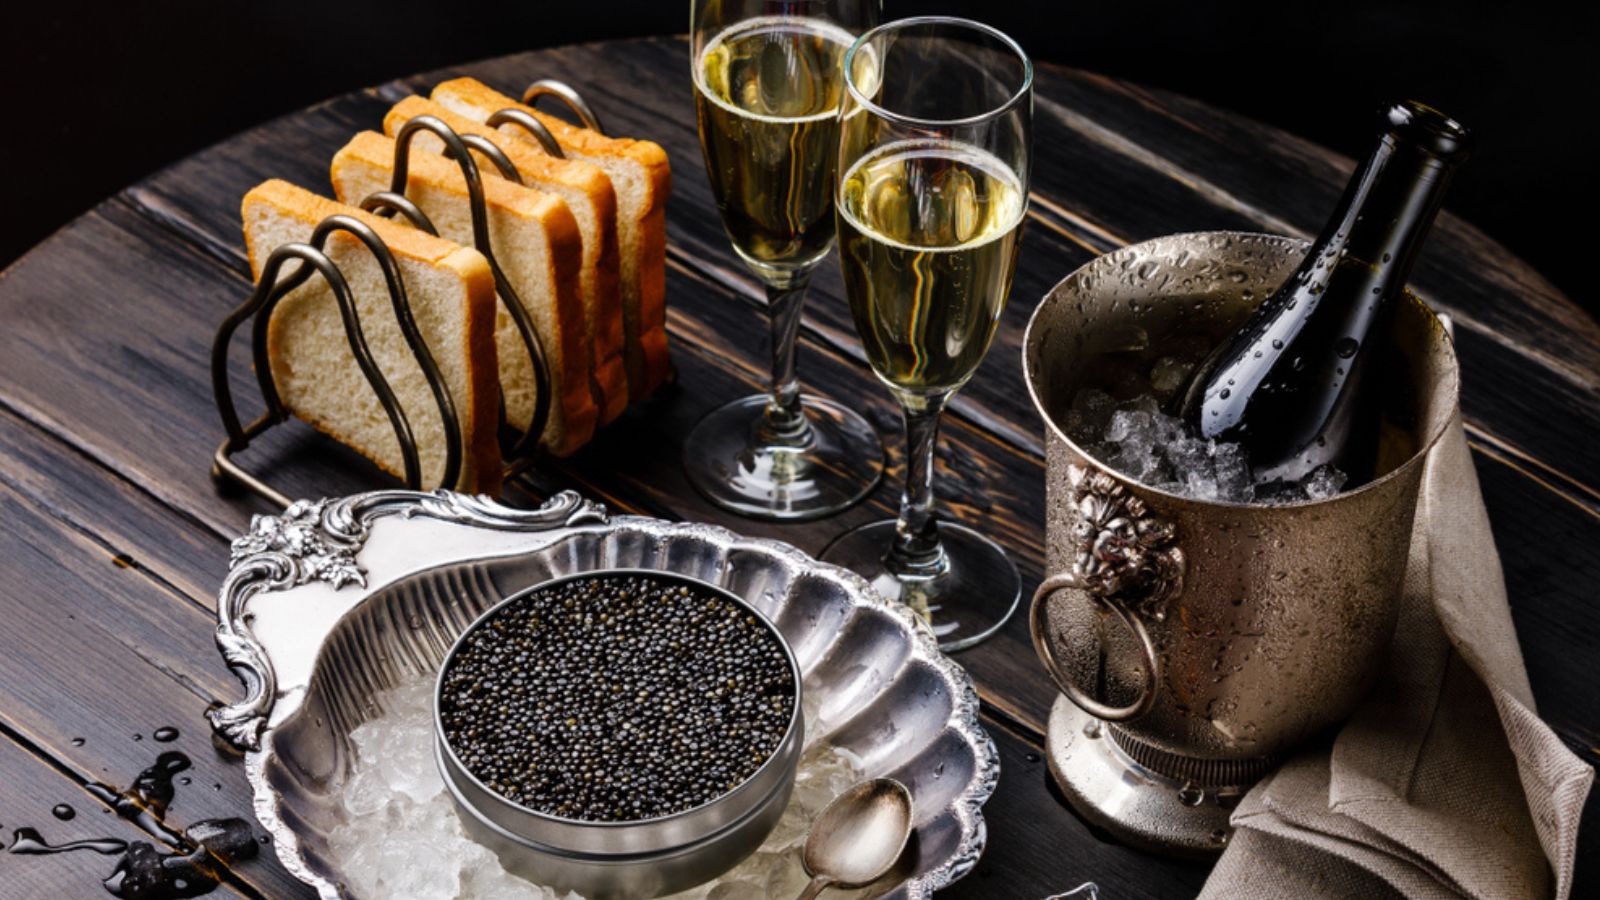 Caviar served with champagne